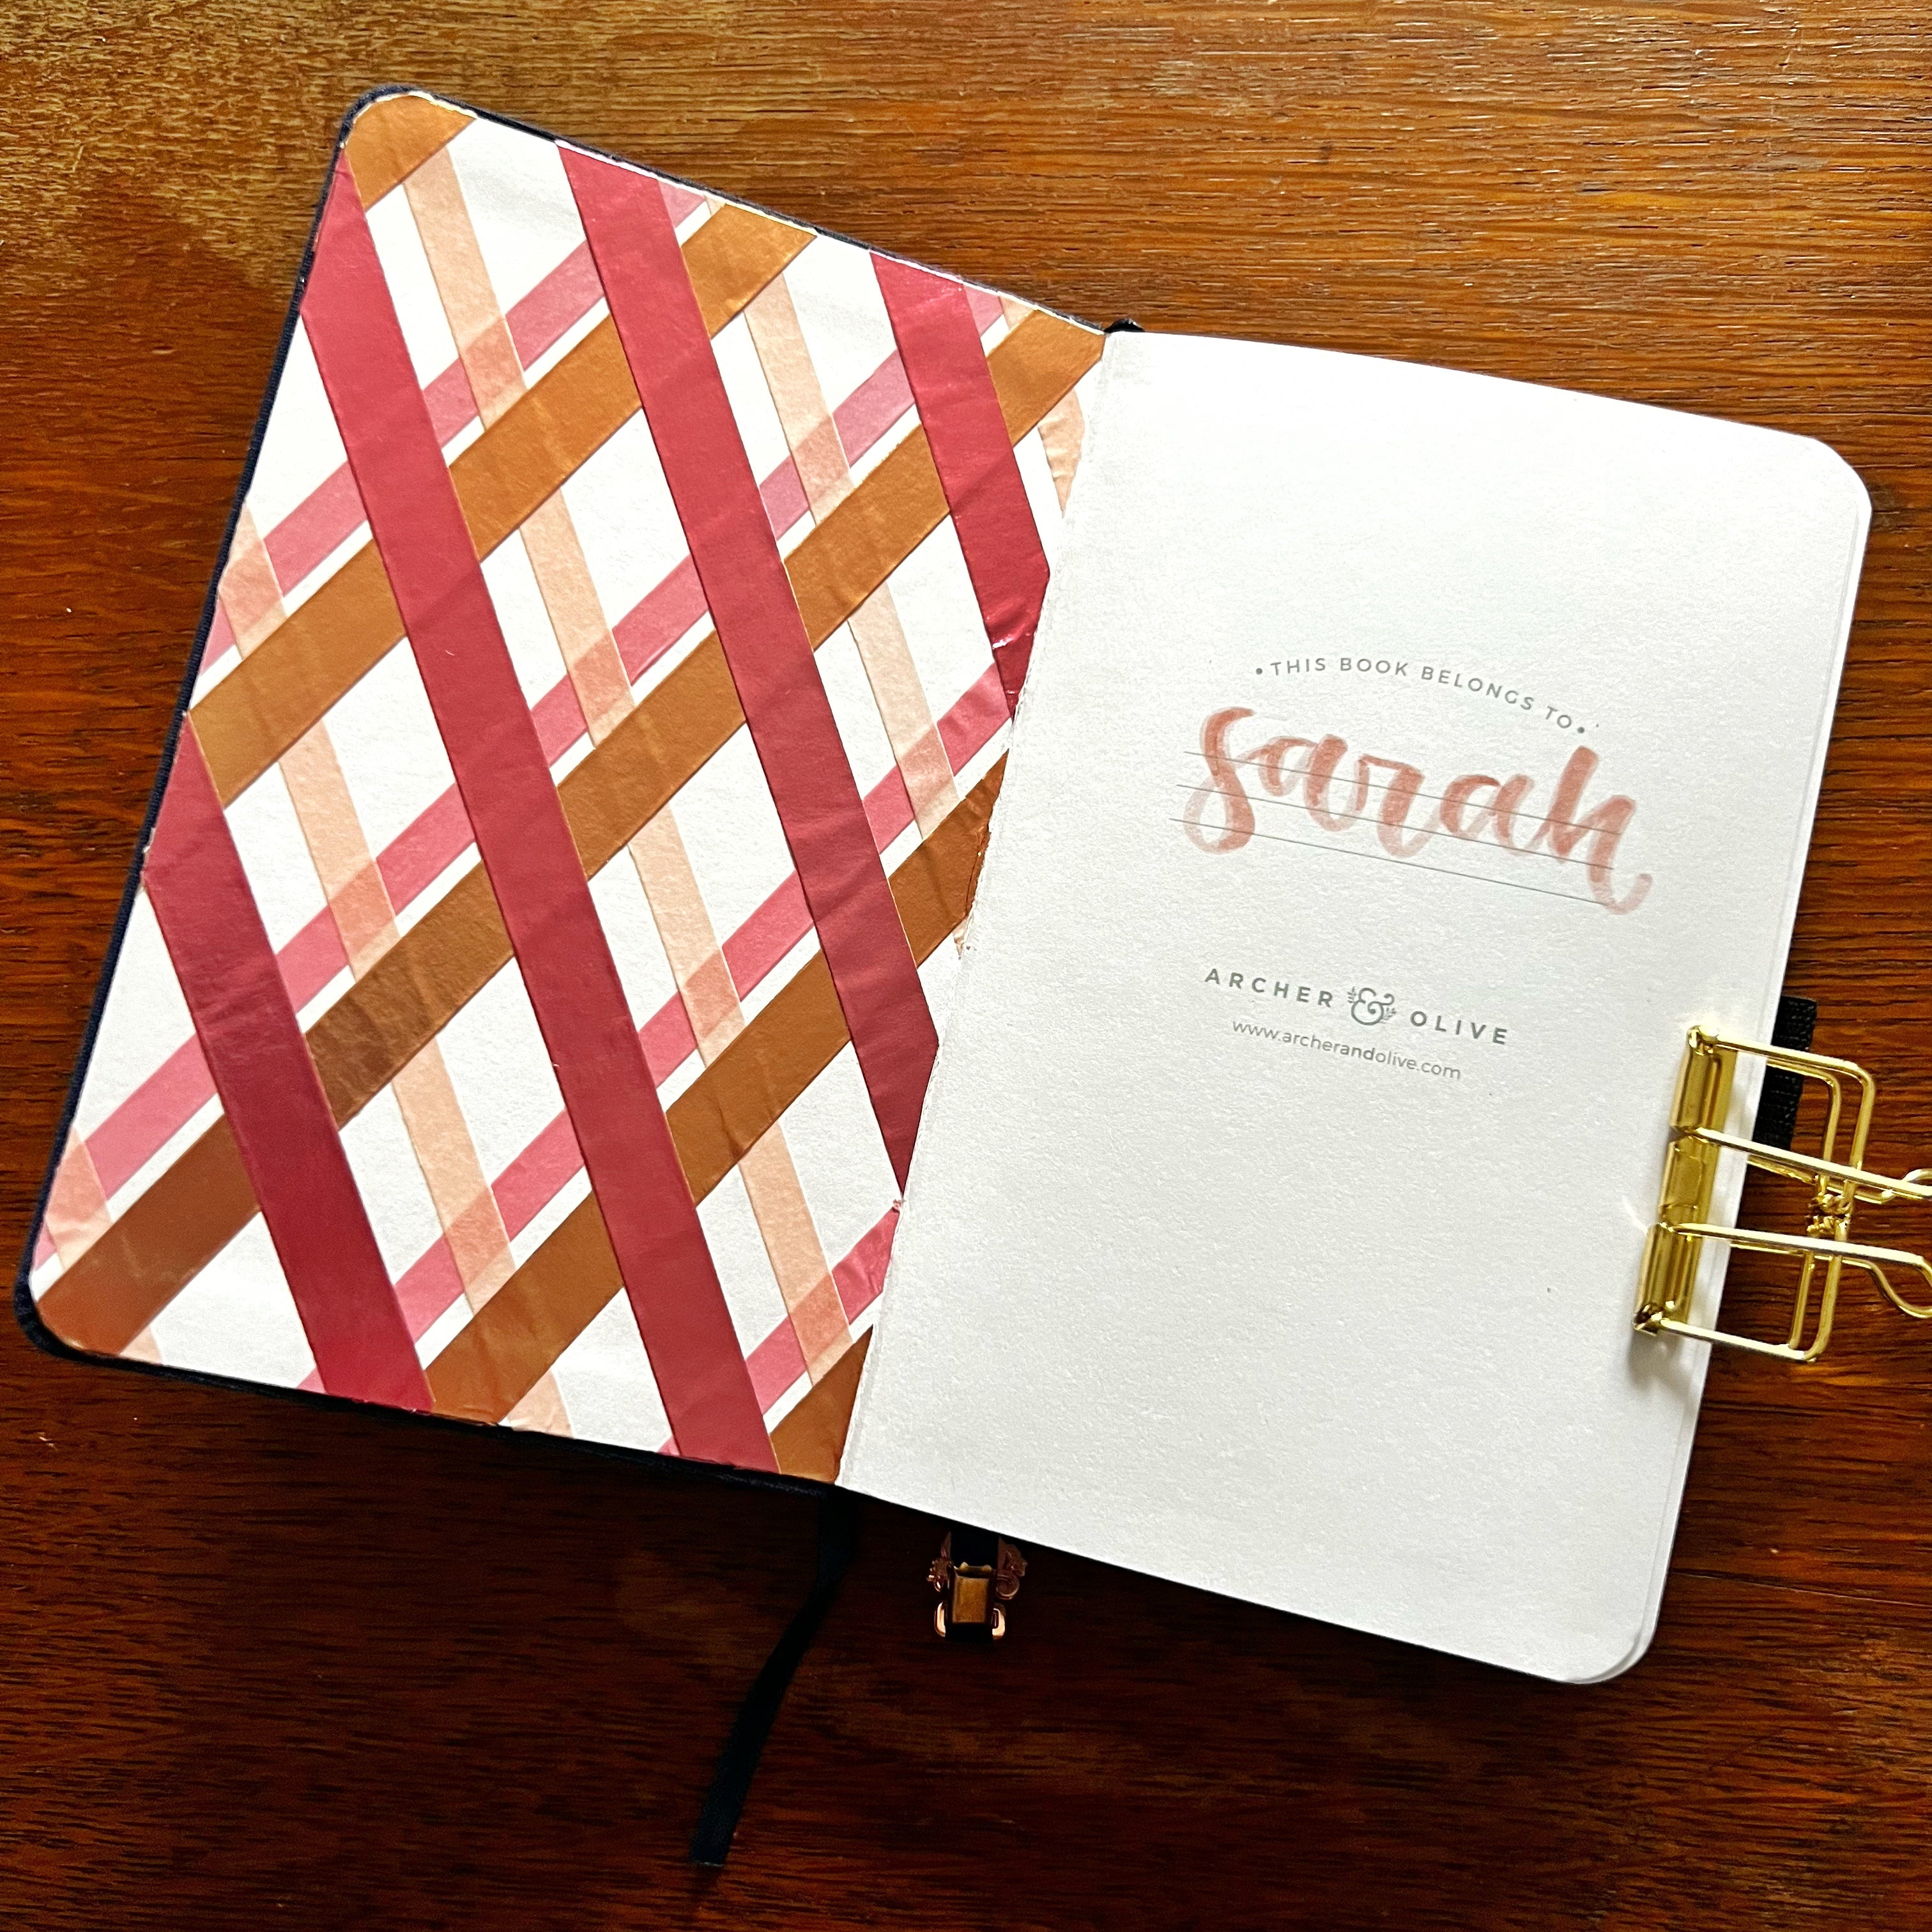 Notebook opened to inside cover decorated with an argyle pattern created with washi tape.